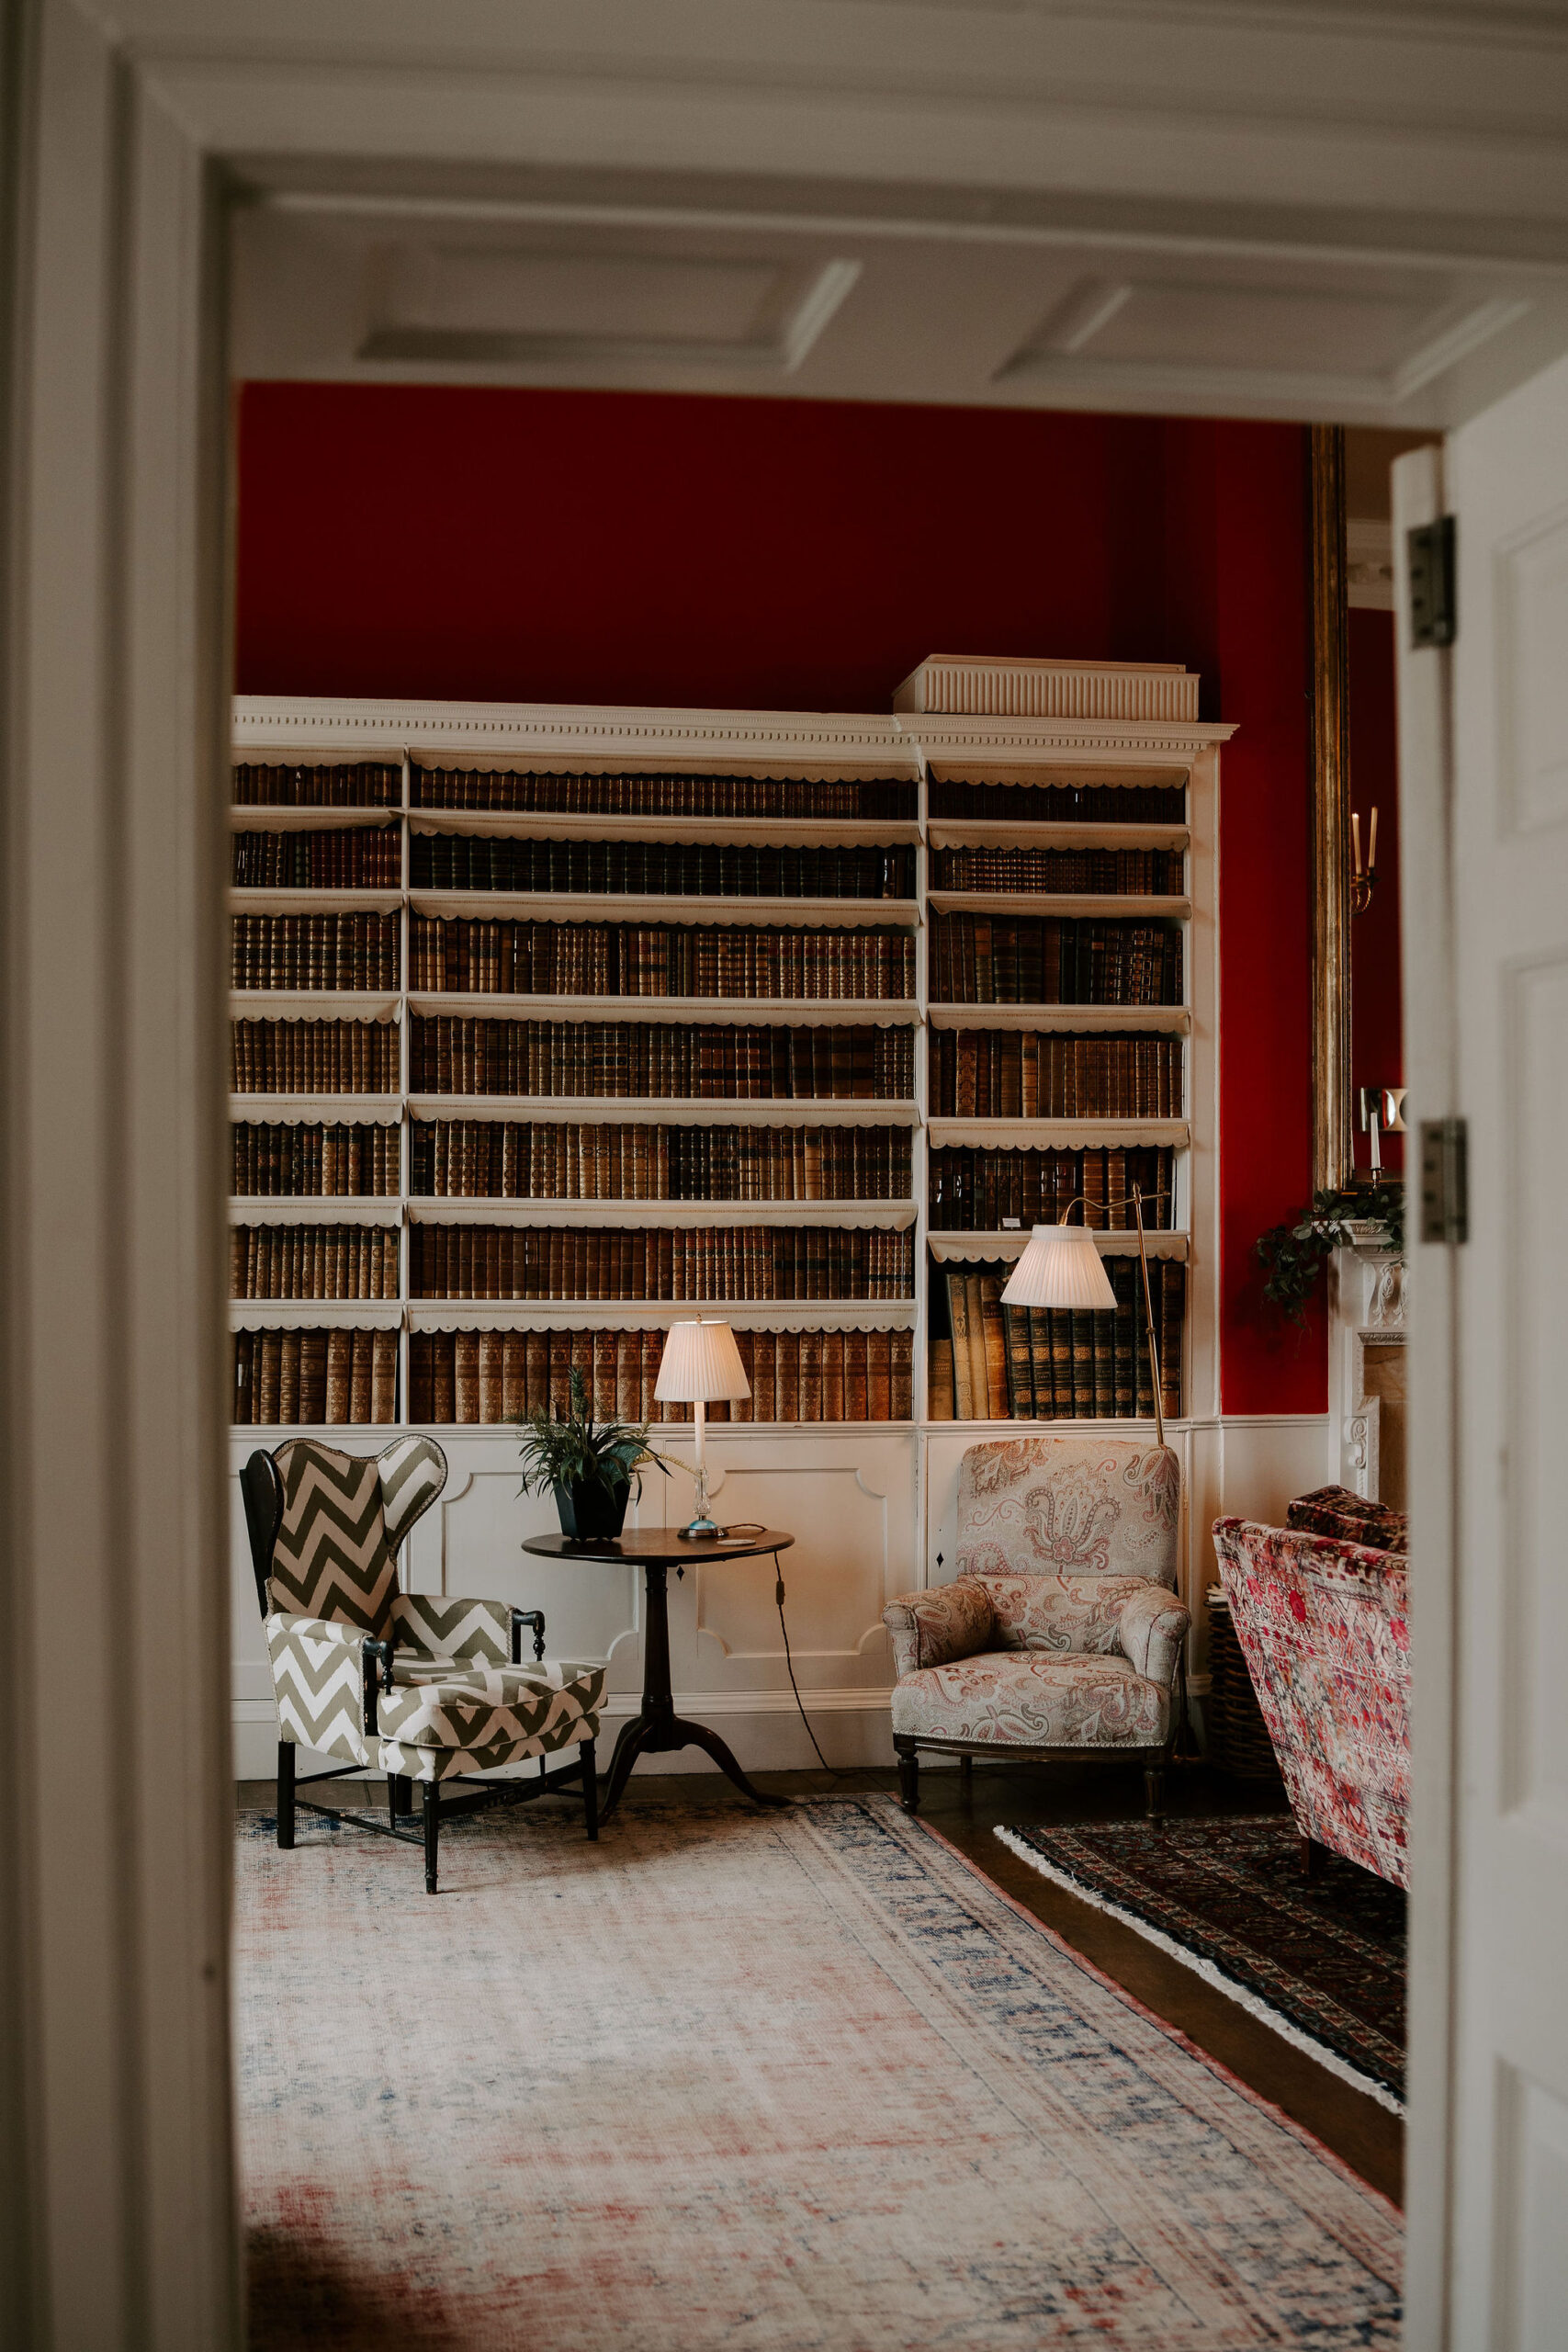 A glimpse into an old library with antique books lined up on white bookshelves. Two armchairs covered in paisley and checks are positioned in front of the bookshelves with a small wooden side table between them on which is a lamp and a plant